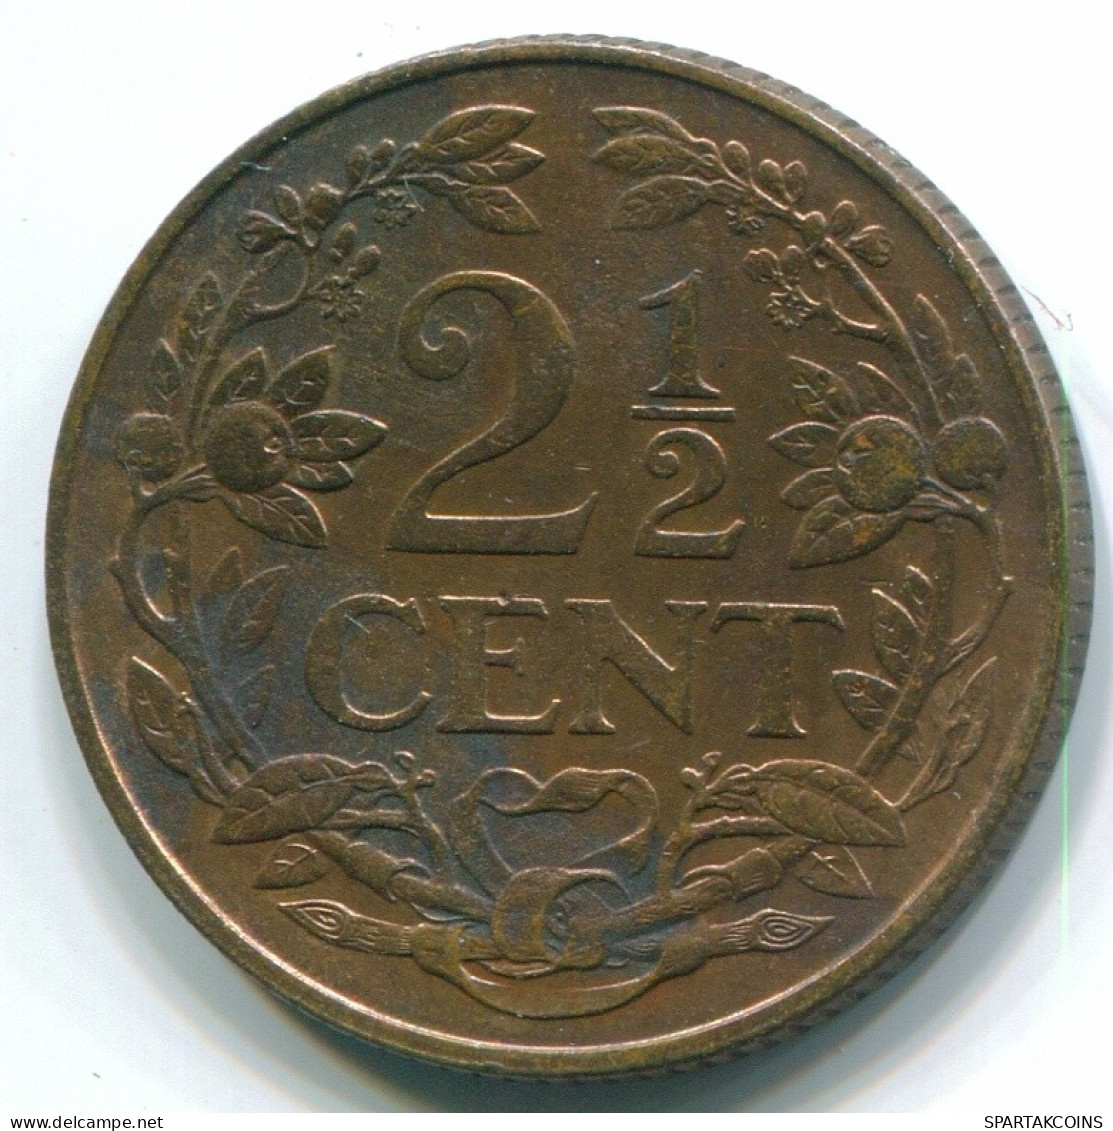 2 1/2 CENT 1965 CURACAO Netherlands Bronze Colonial Coin #S10210.U.A - Curacao